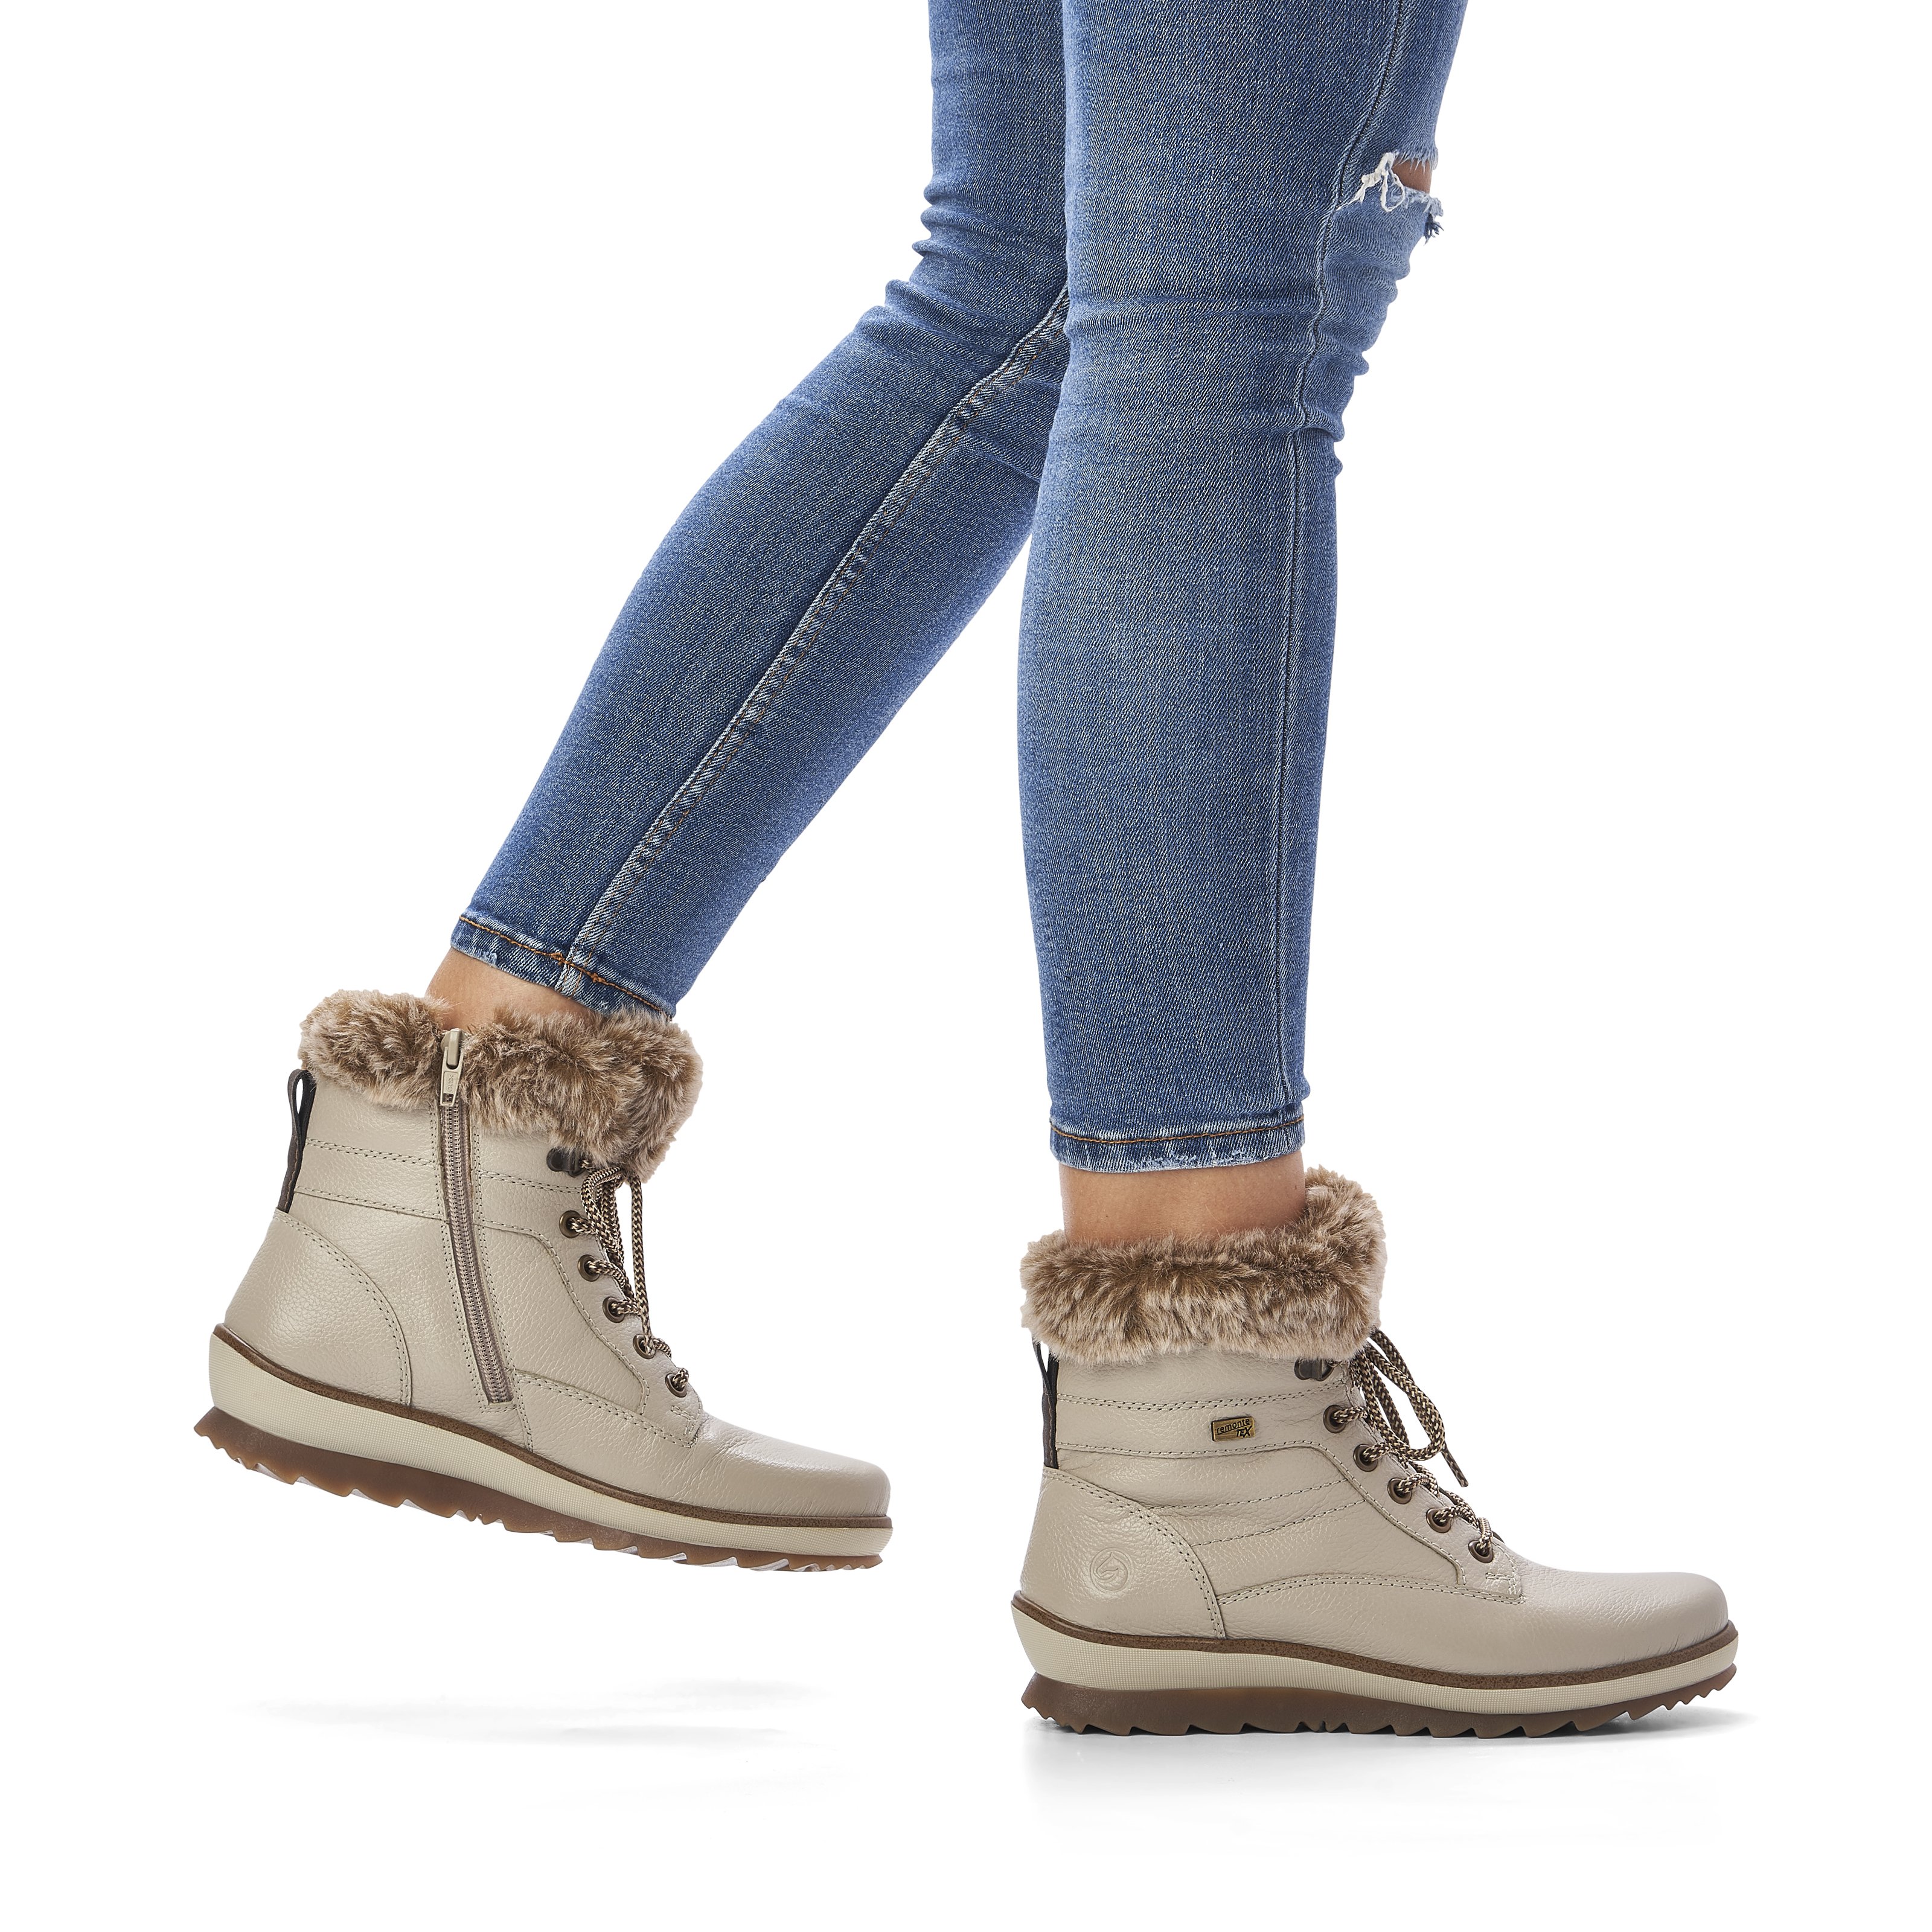 Brown beige remonte women´s lace-up boots R8477-60 with cushioning profile sole. Shoe on foot